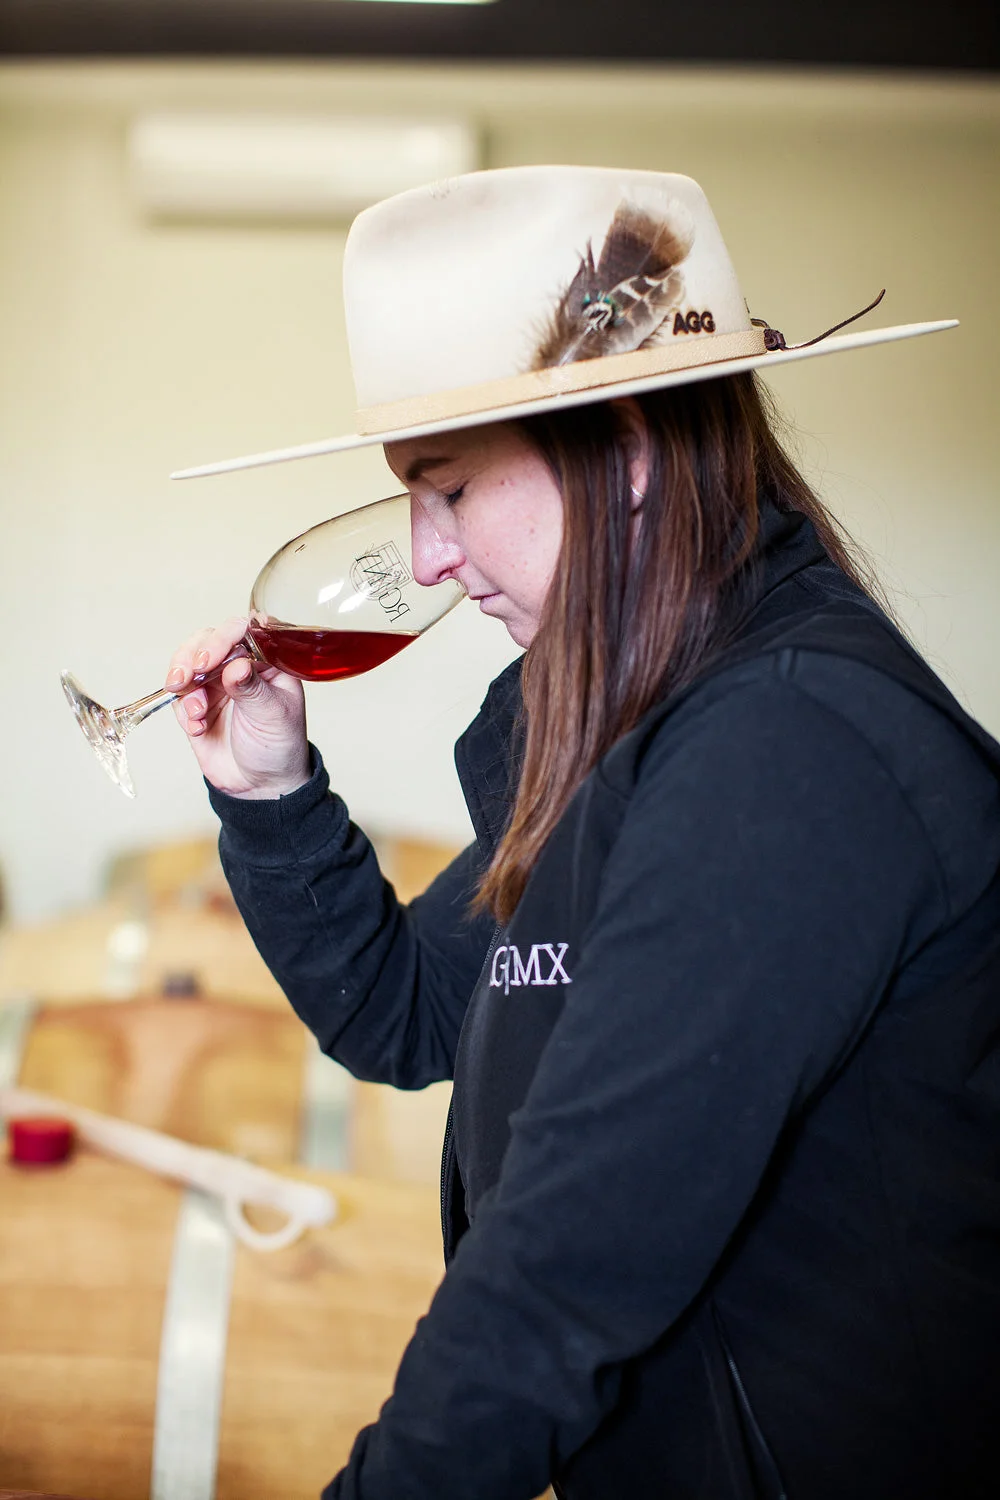 woman with nice hat smelling wine RG|NY